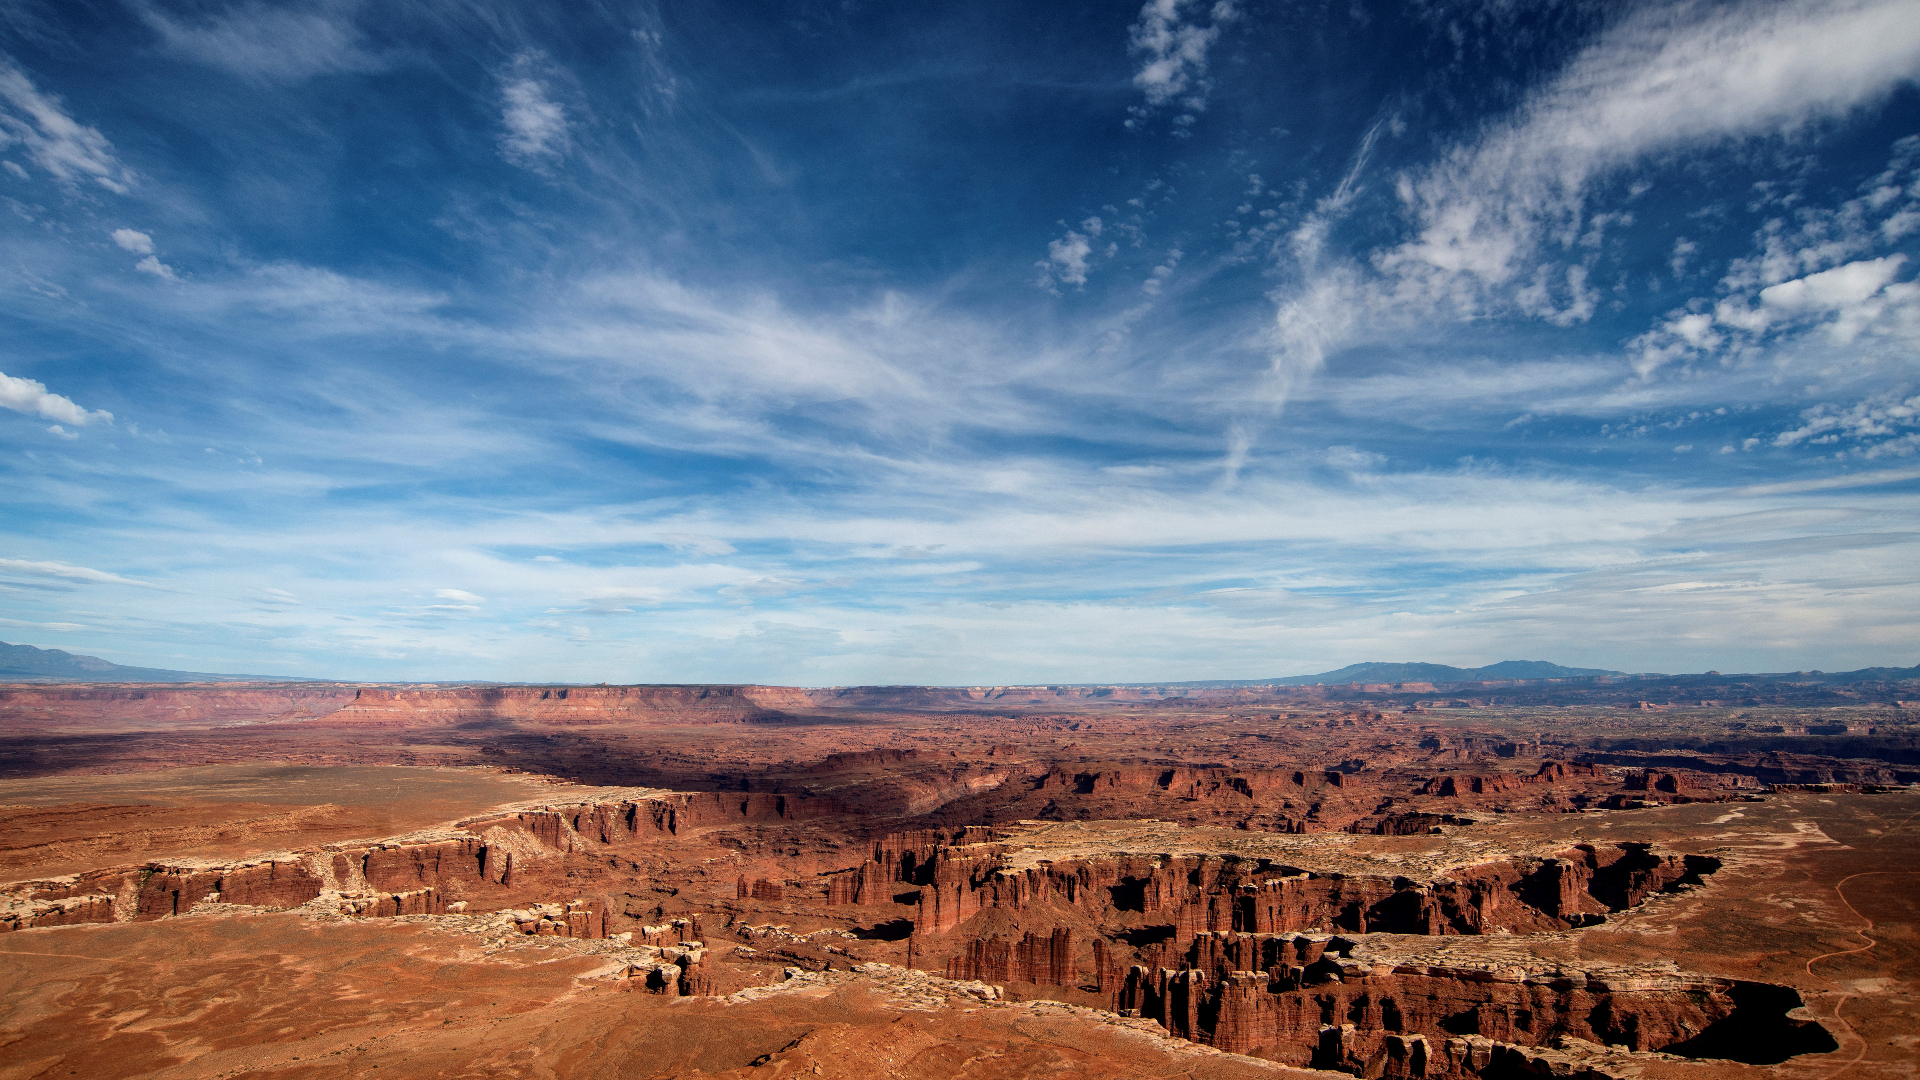 red rock structures and canyons below a blue sky with wispy white clouds.